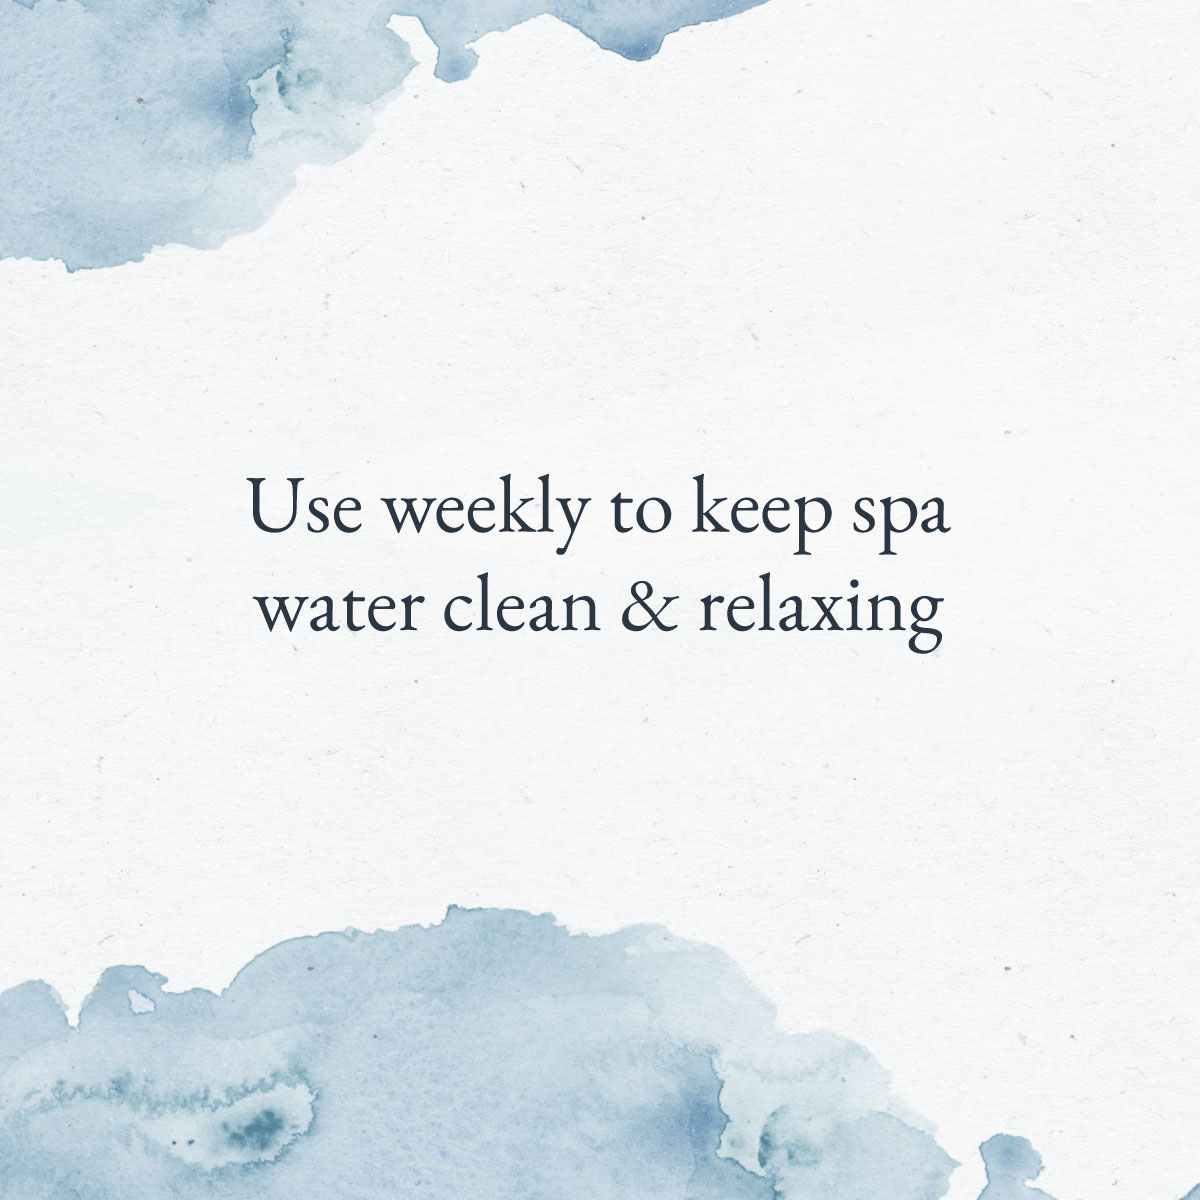 Use weekly to keep spa water clean & relaxing